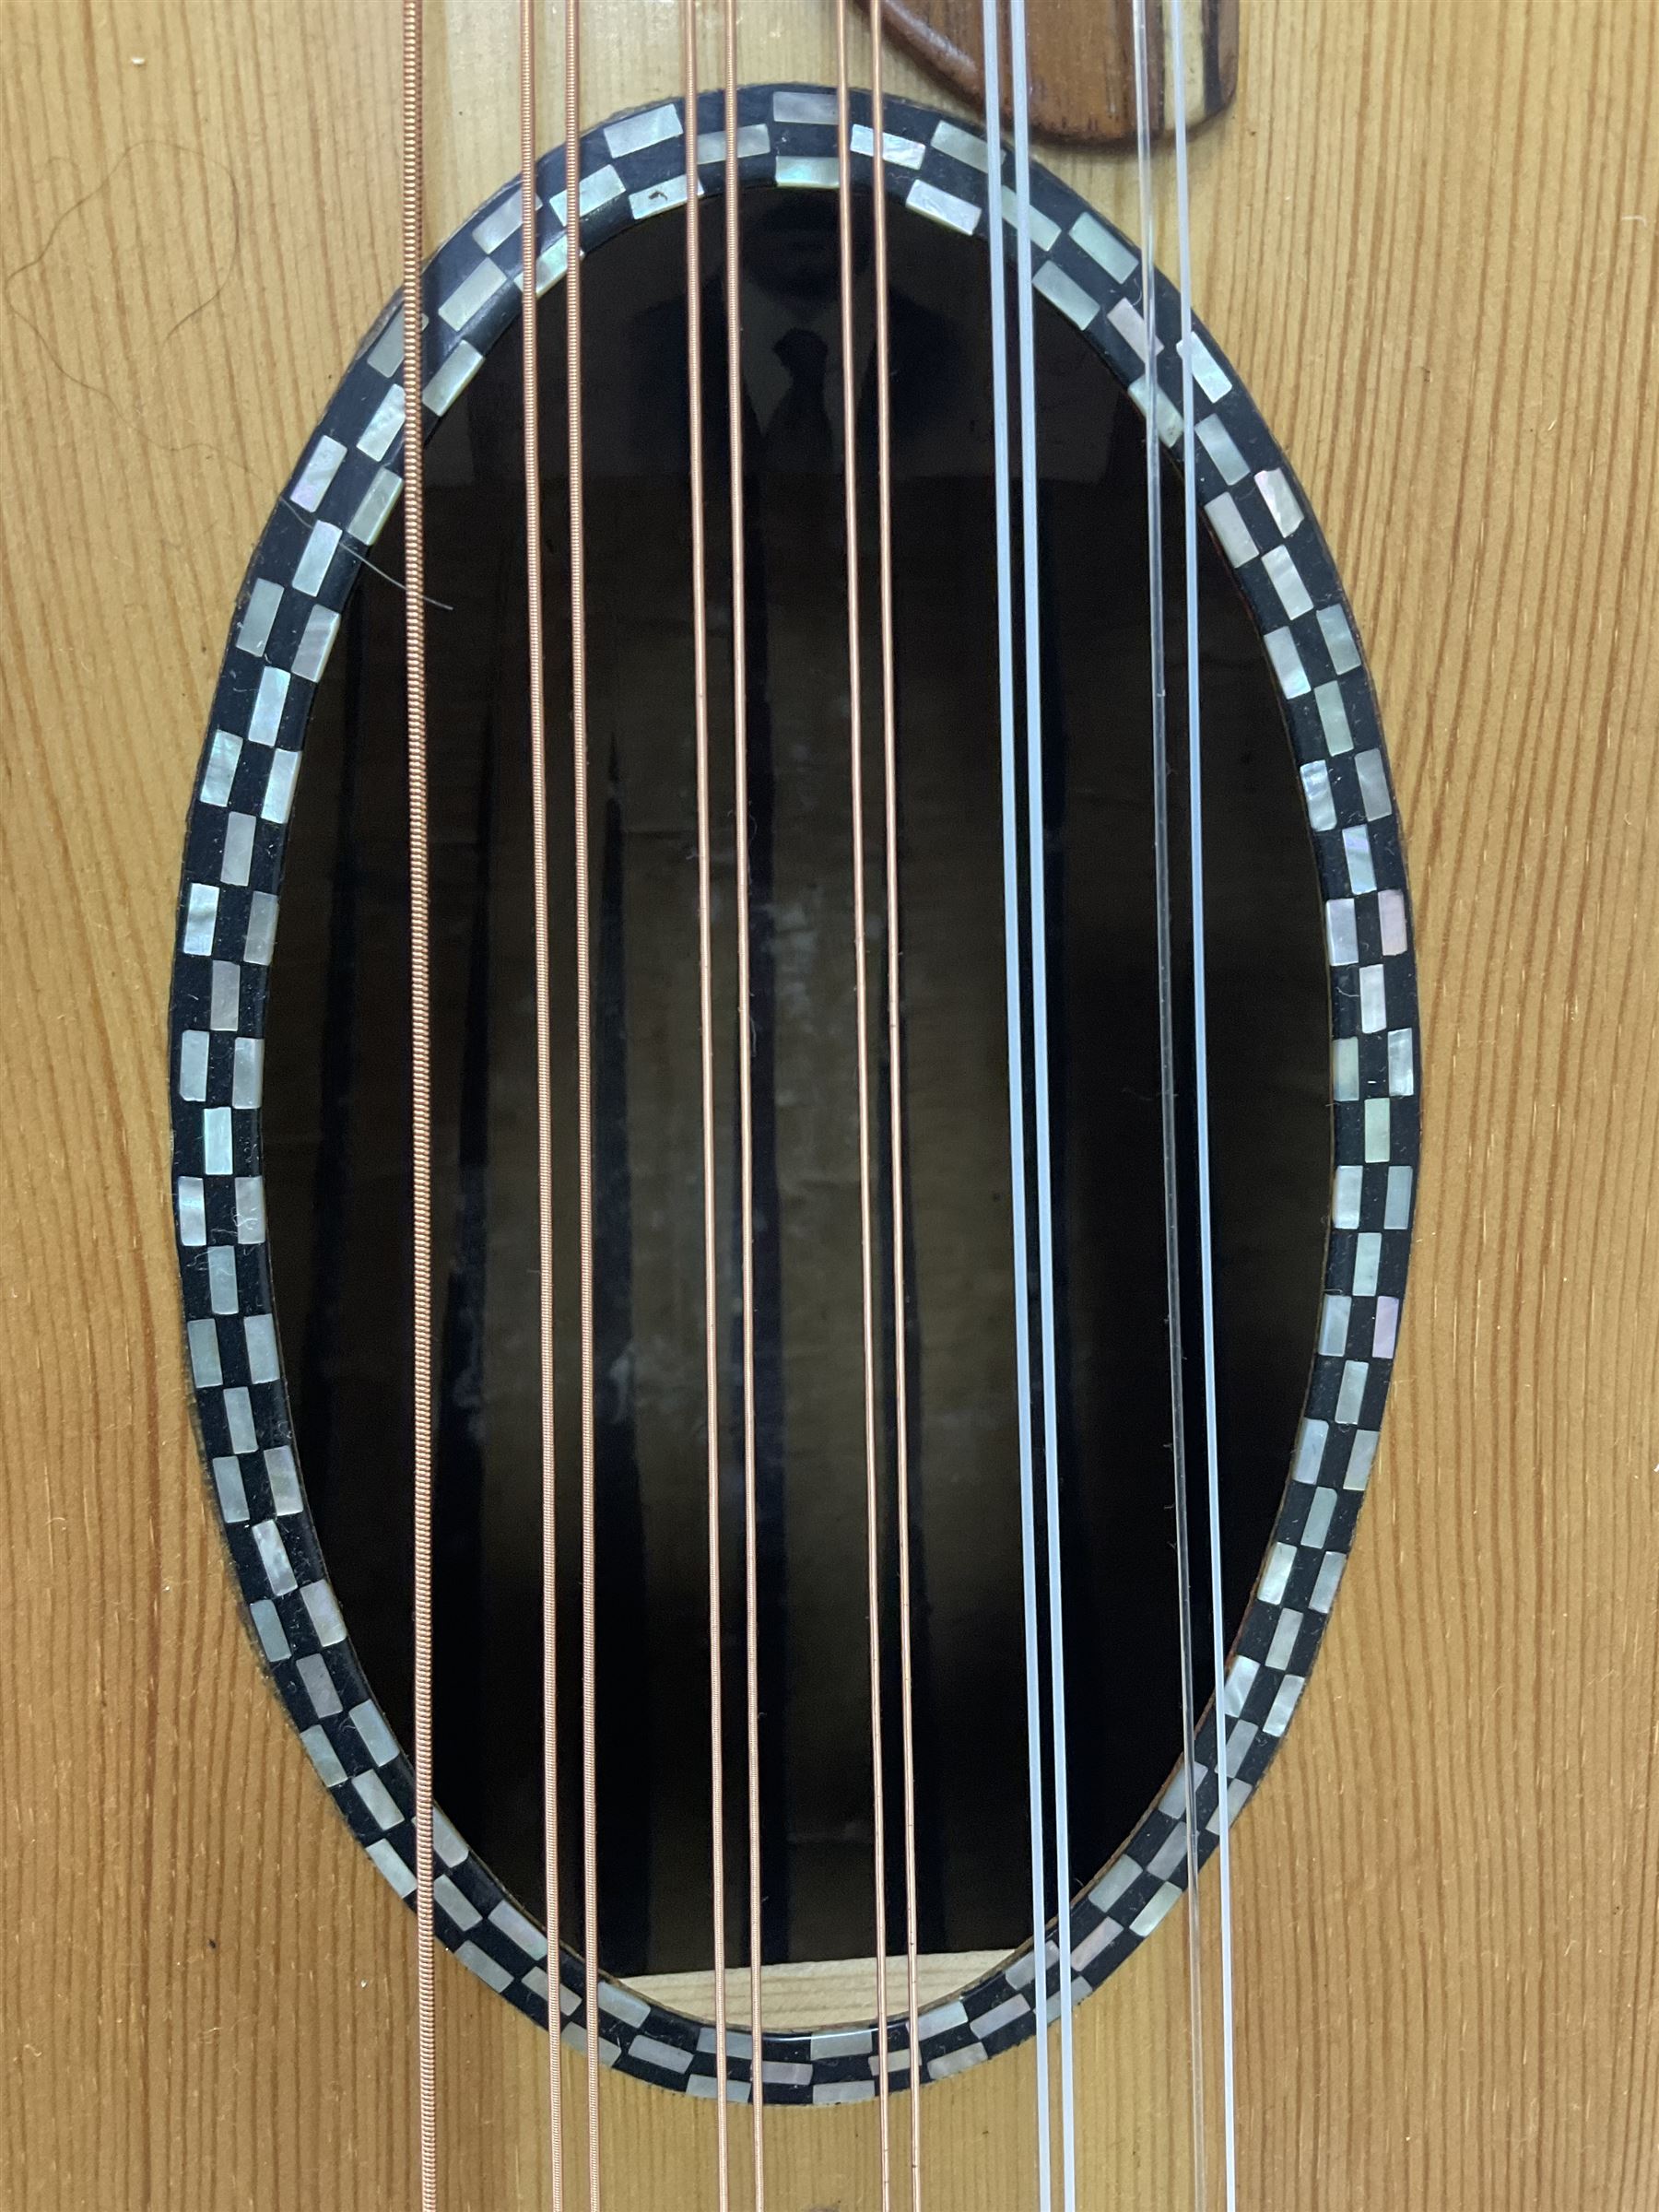 20th century Middle Eastern six string lute with a segmented back and a purpose designed hardwood st - Image 7 of 16